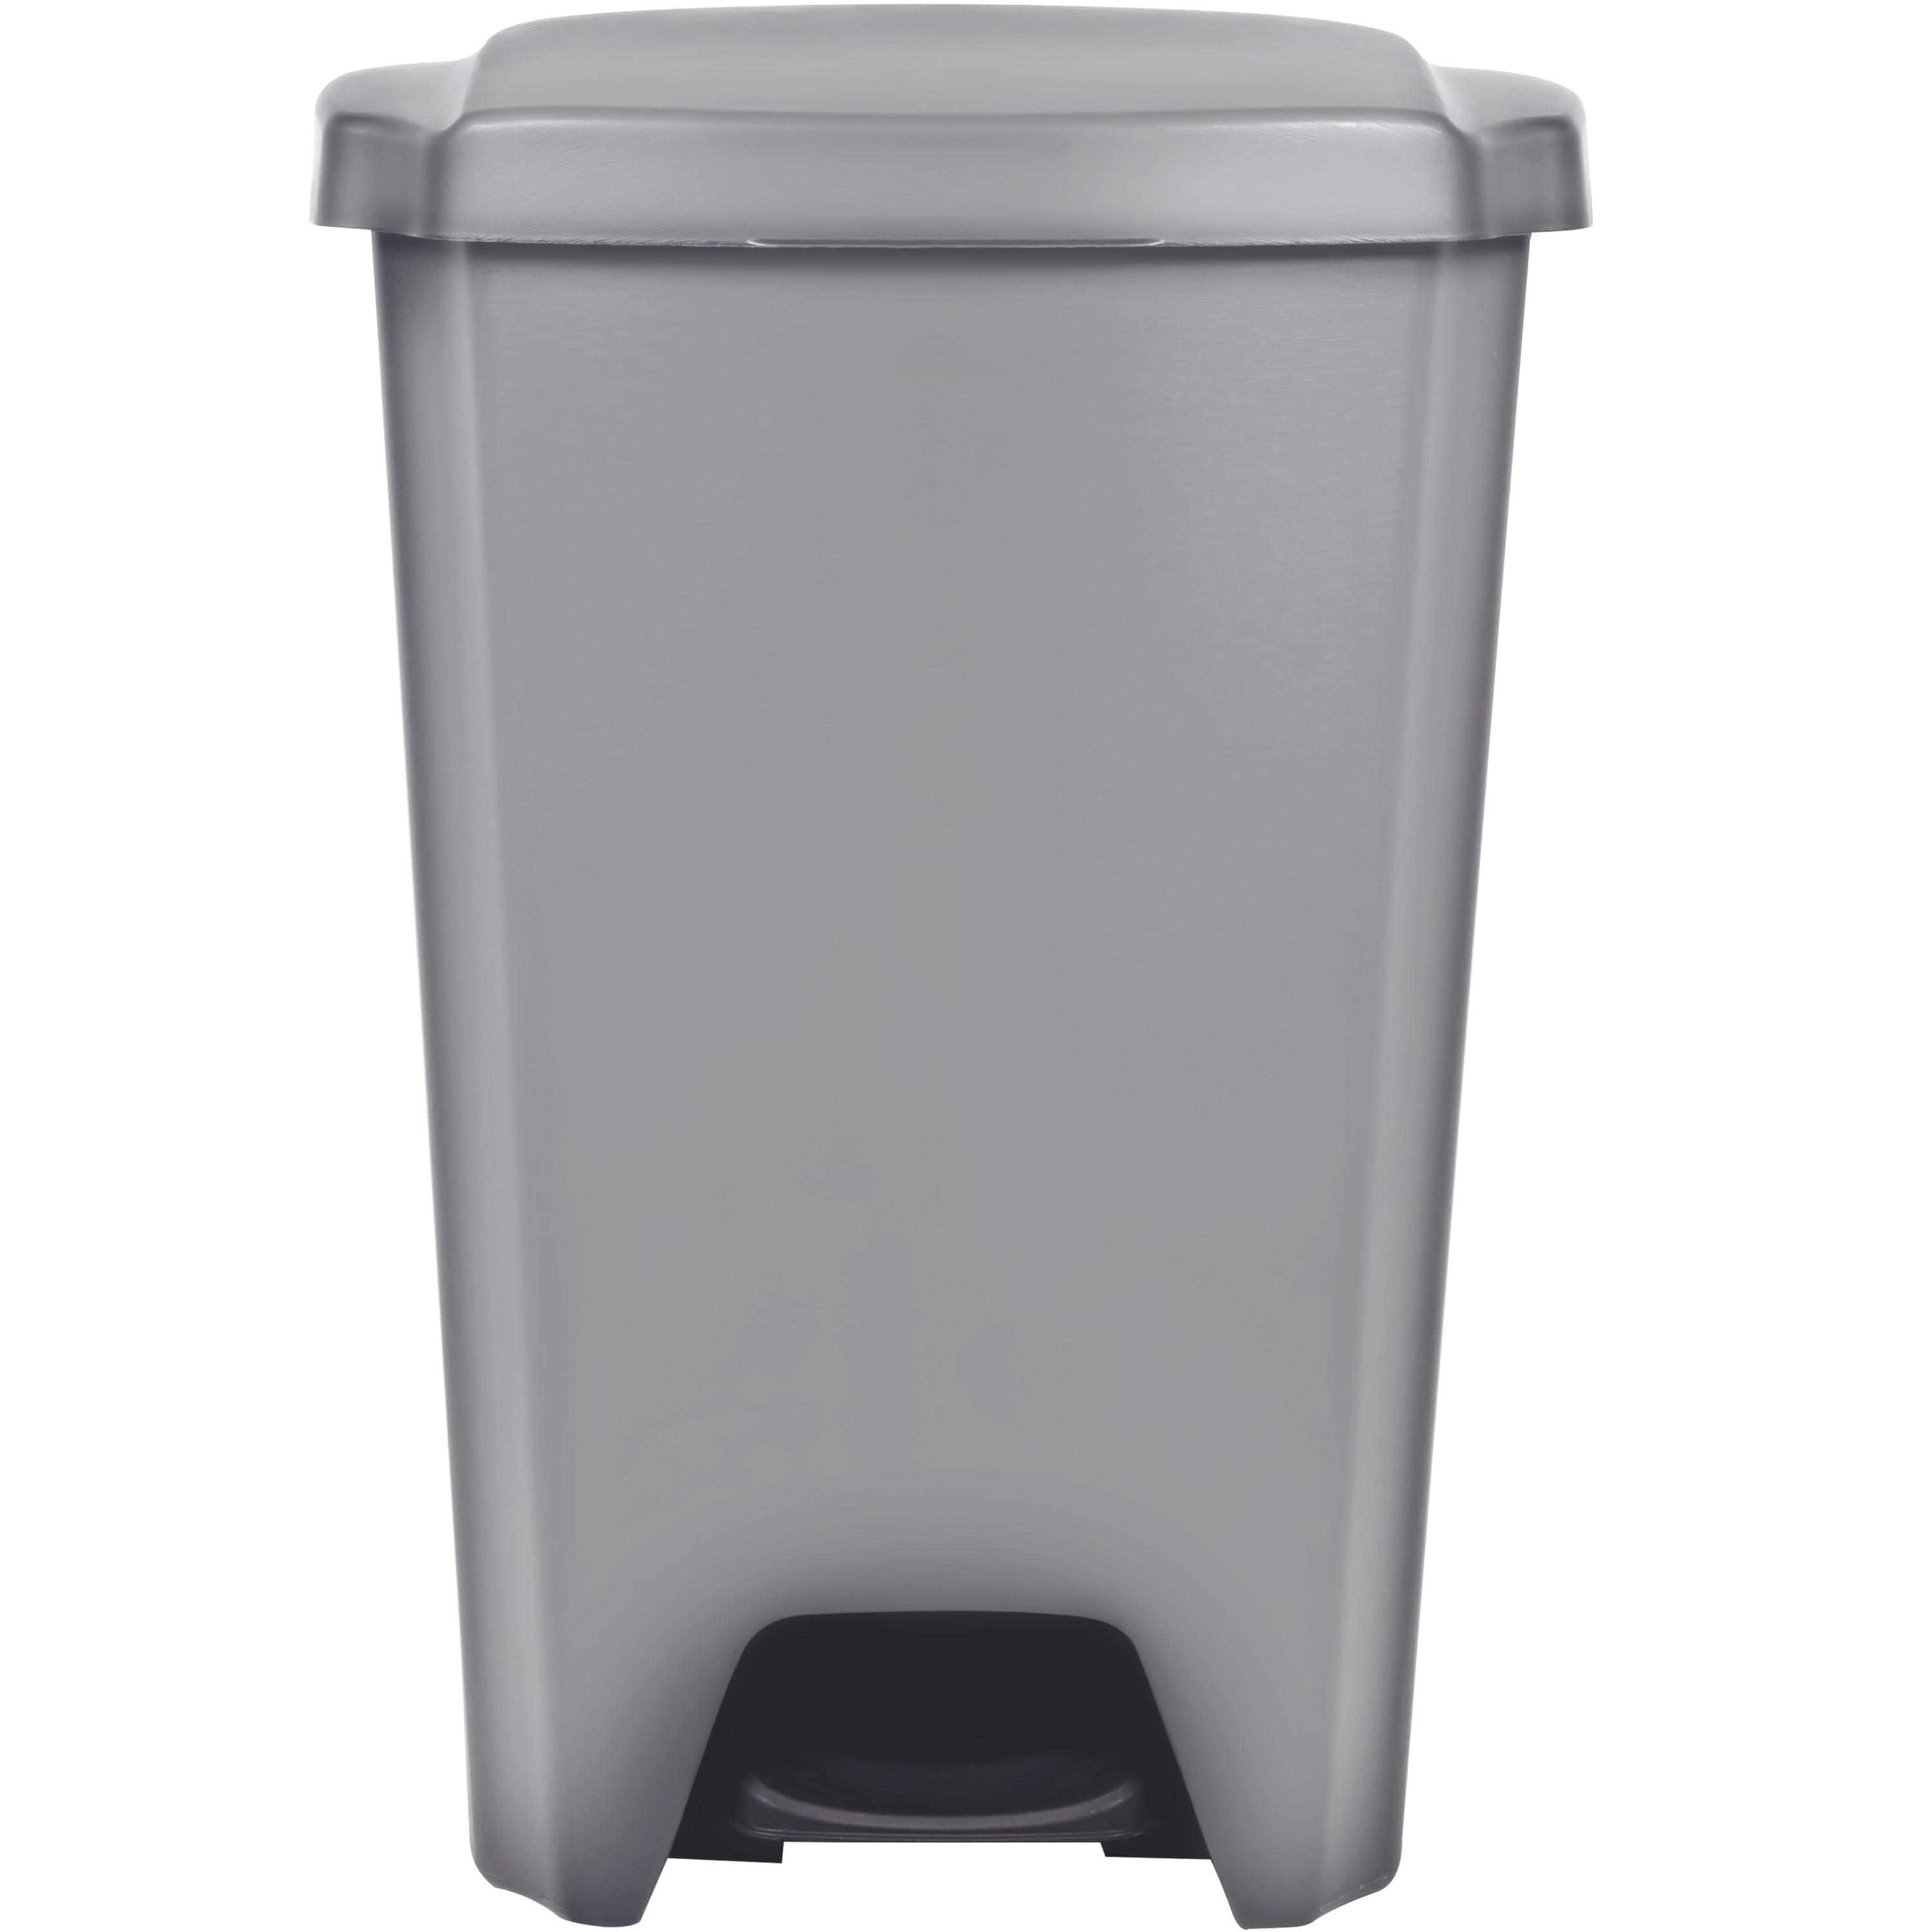 New Trash can ( Hefty 12.7 gallon) for Sale in Rancho Cucamonga